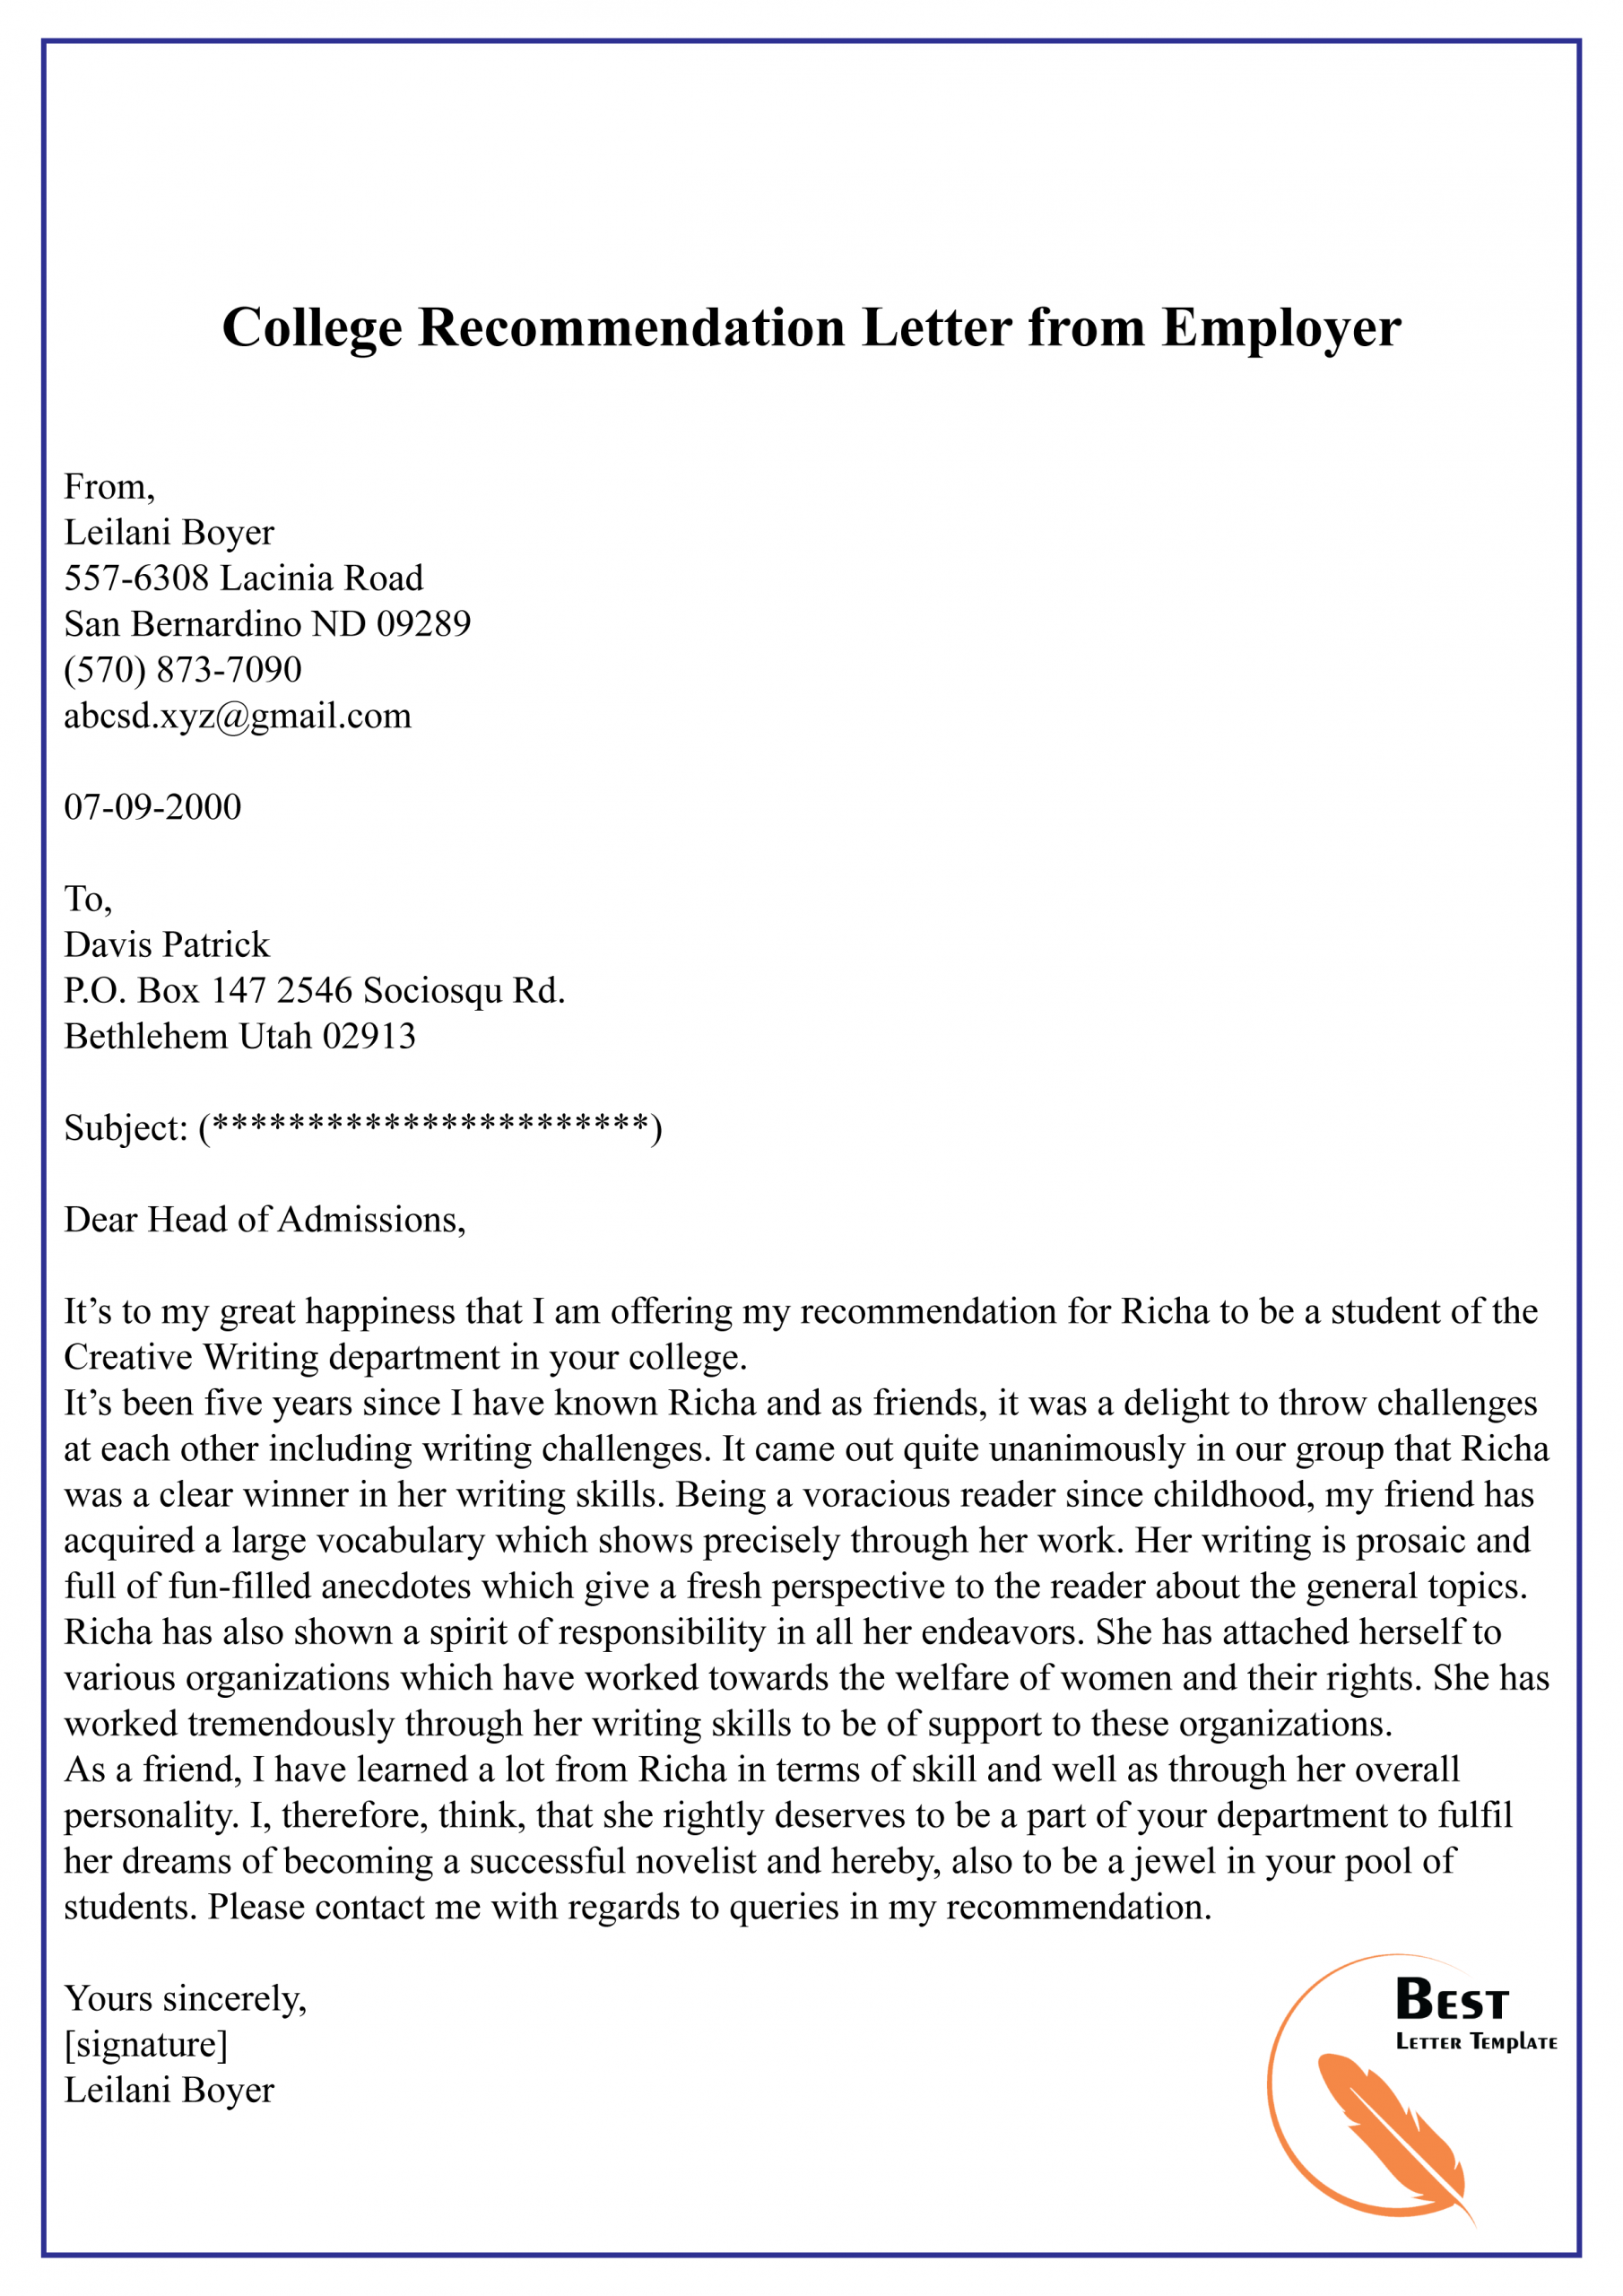 College Recommendation Letter From Employer 01 Best Letter in size 2480 X 3508